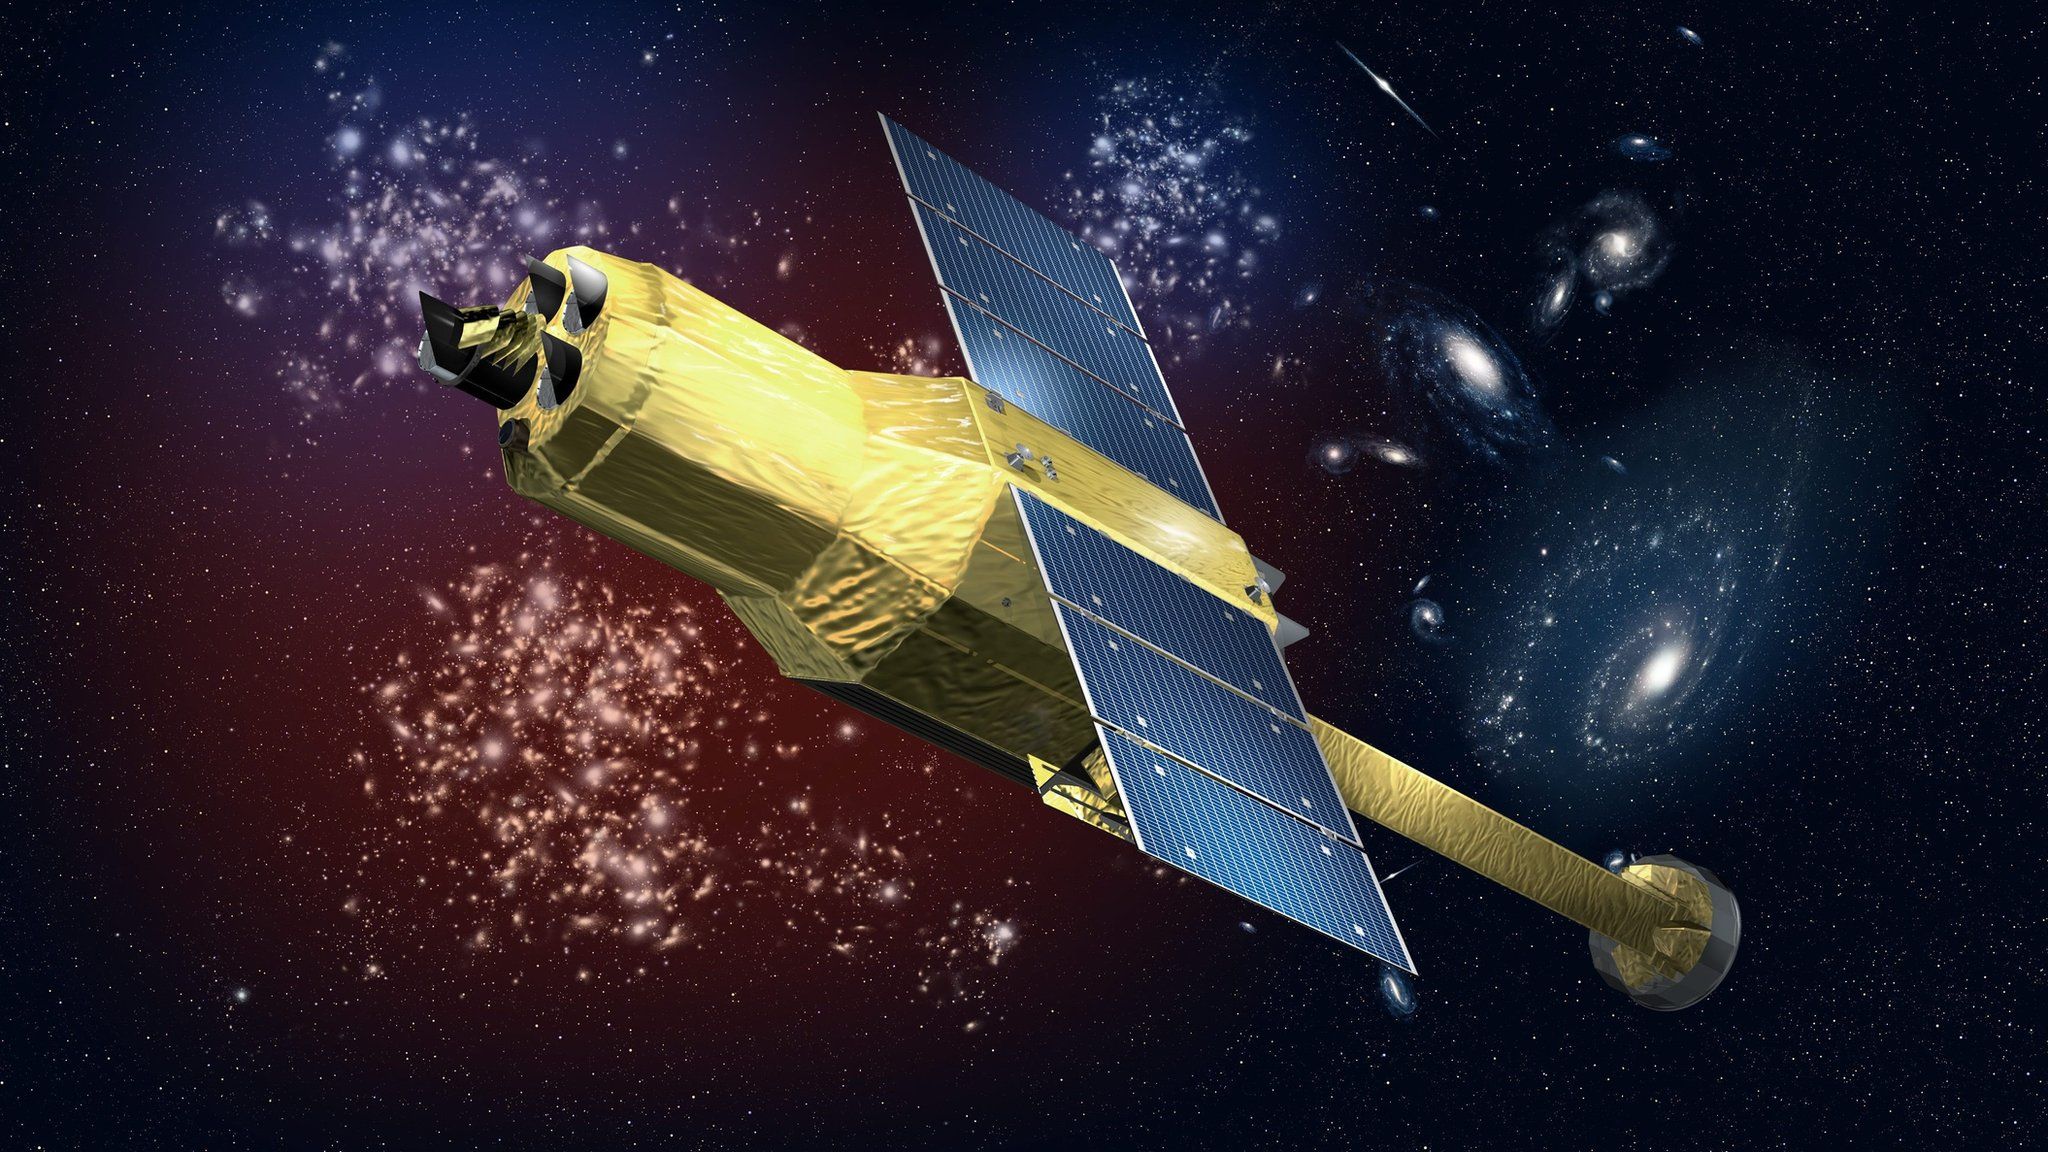 An undated artist's rendering made available by the Japan Aerospace Exploration Agency, depicting the satellite